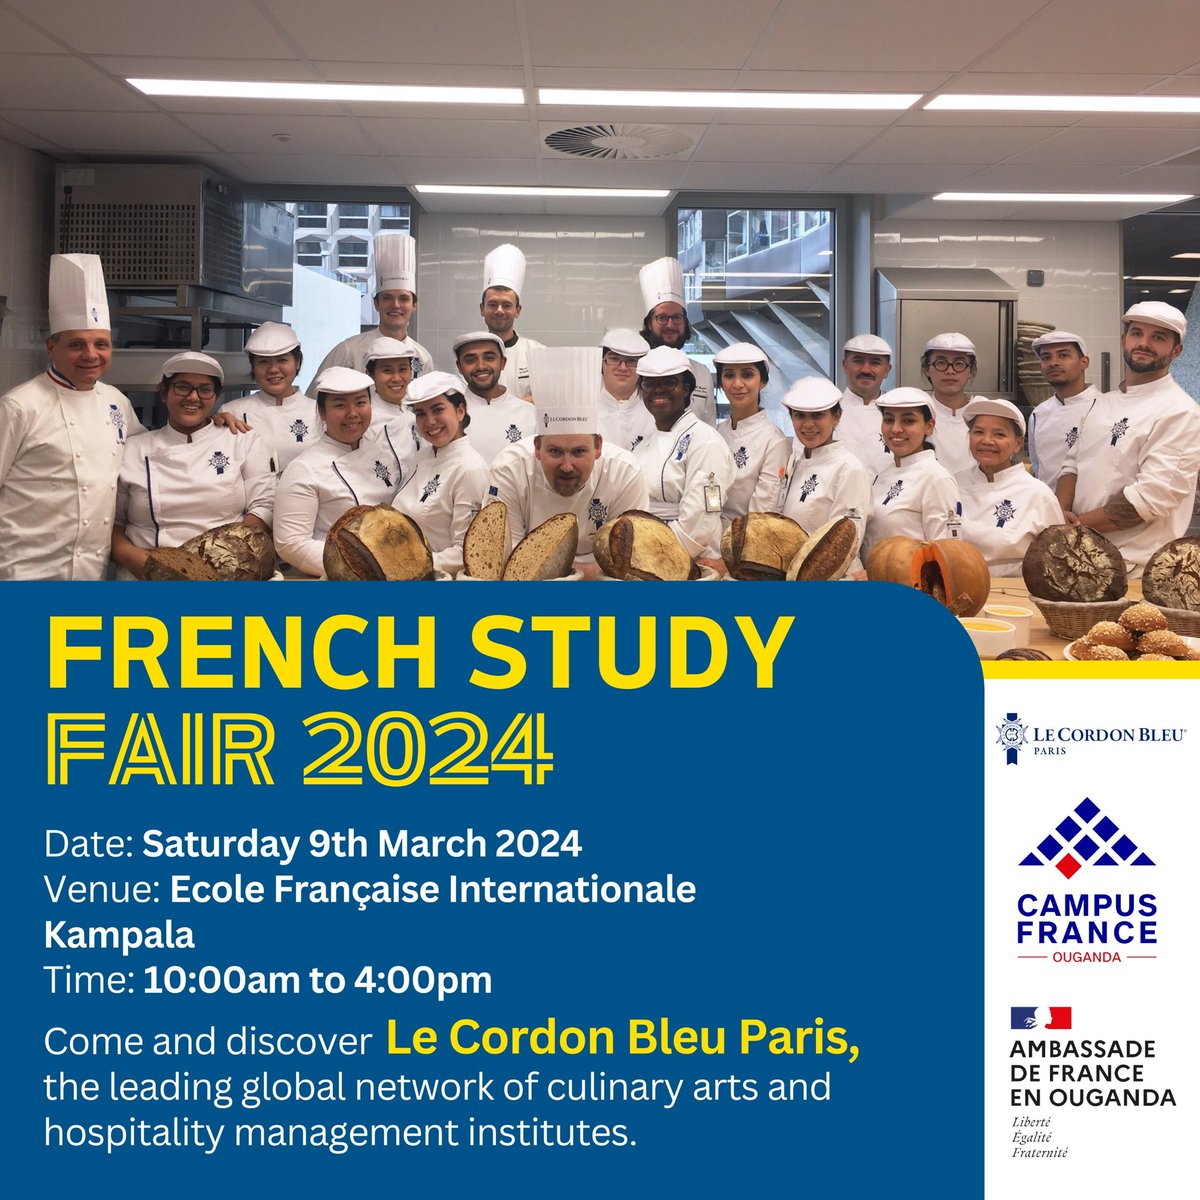 Are culinary arts your passion ? We are glad to announce that @LeCordon, a very prestigious school, is with us at @lfkampala. Just like Julia Child, you too can become a reknown chef 😉 ! Pass by before 4pm to speak to a represententive. #RendezvousenFrance 🇫🇷